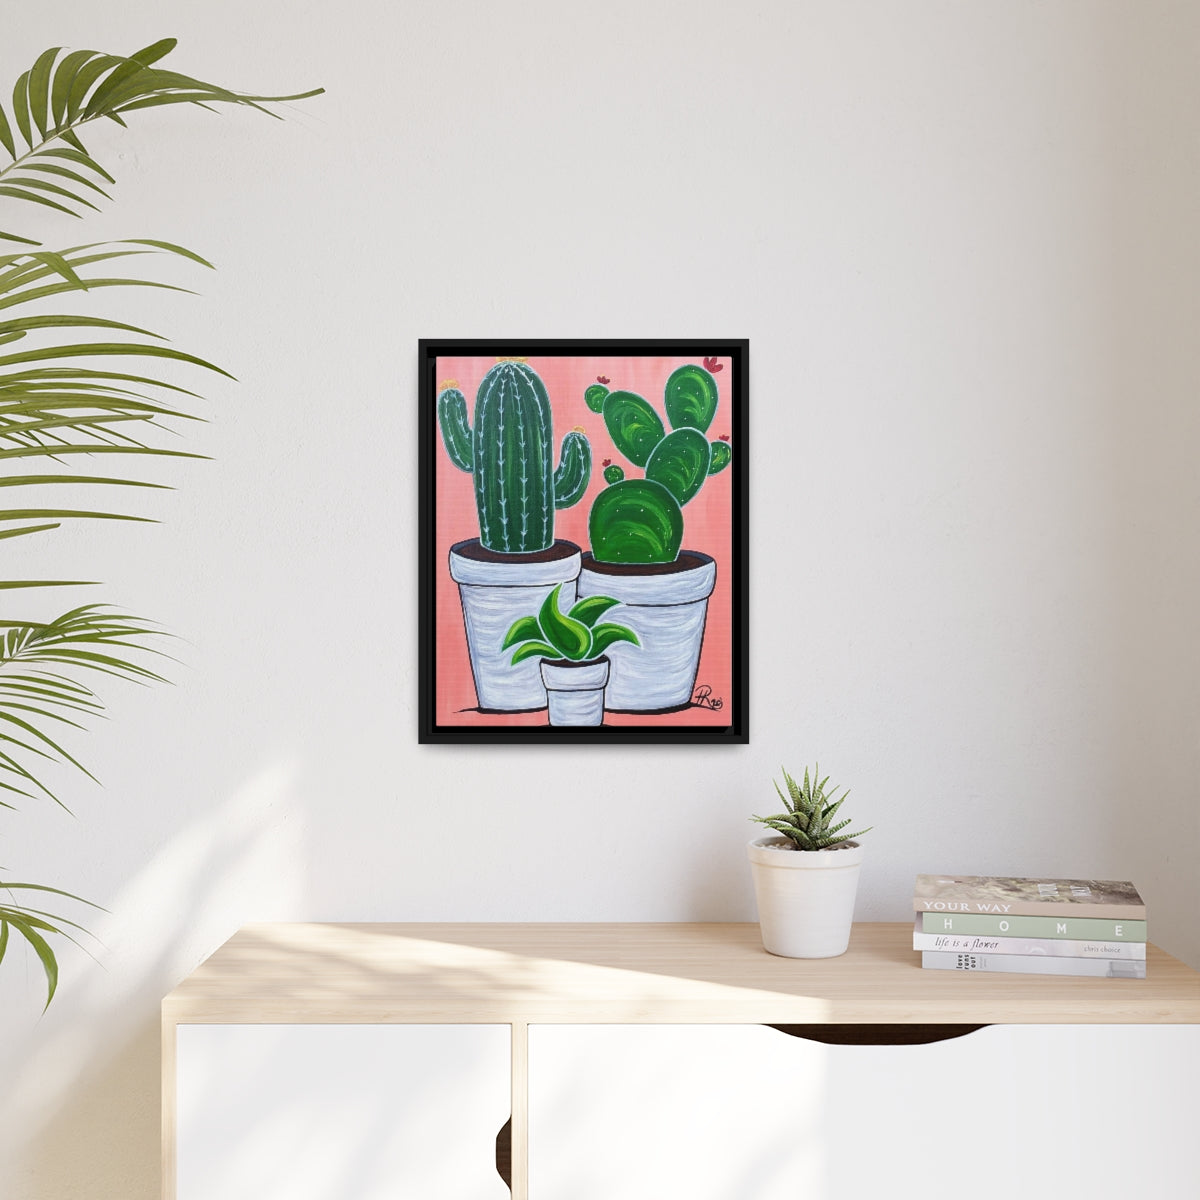 Cactus Plants Nature Artwork Vertical Framed Gallery Wrapped Matte Canvas Print